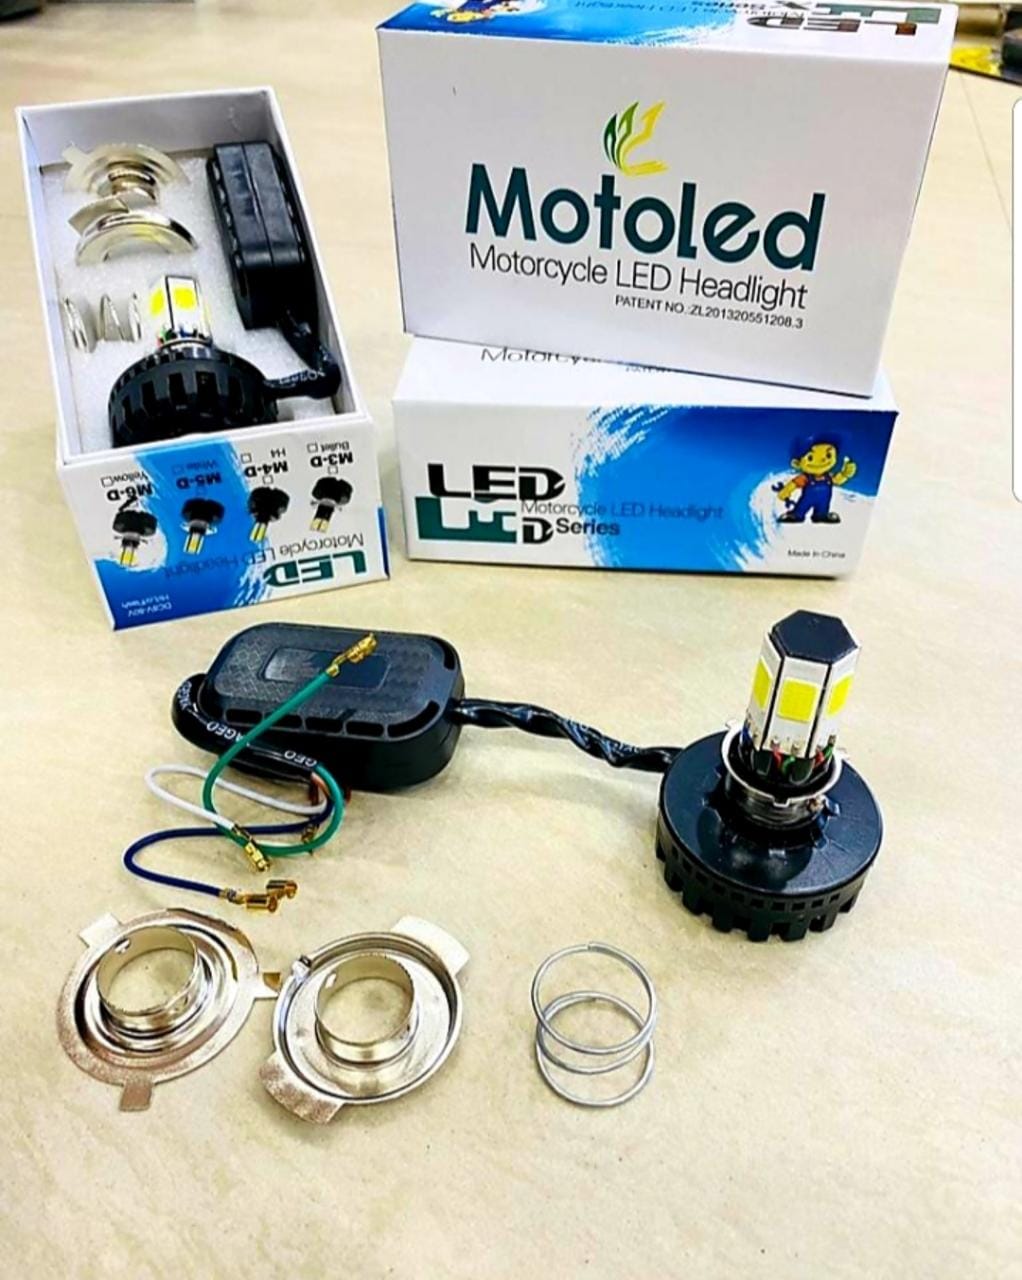 M6 LED Headlight with Flasher for Motorcycle Universal